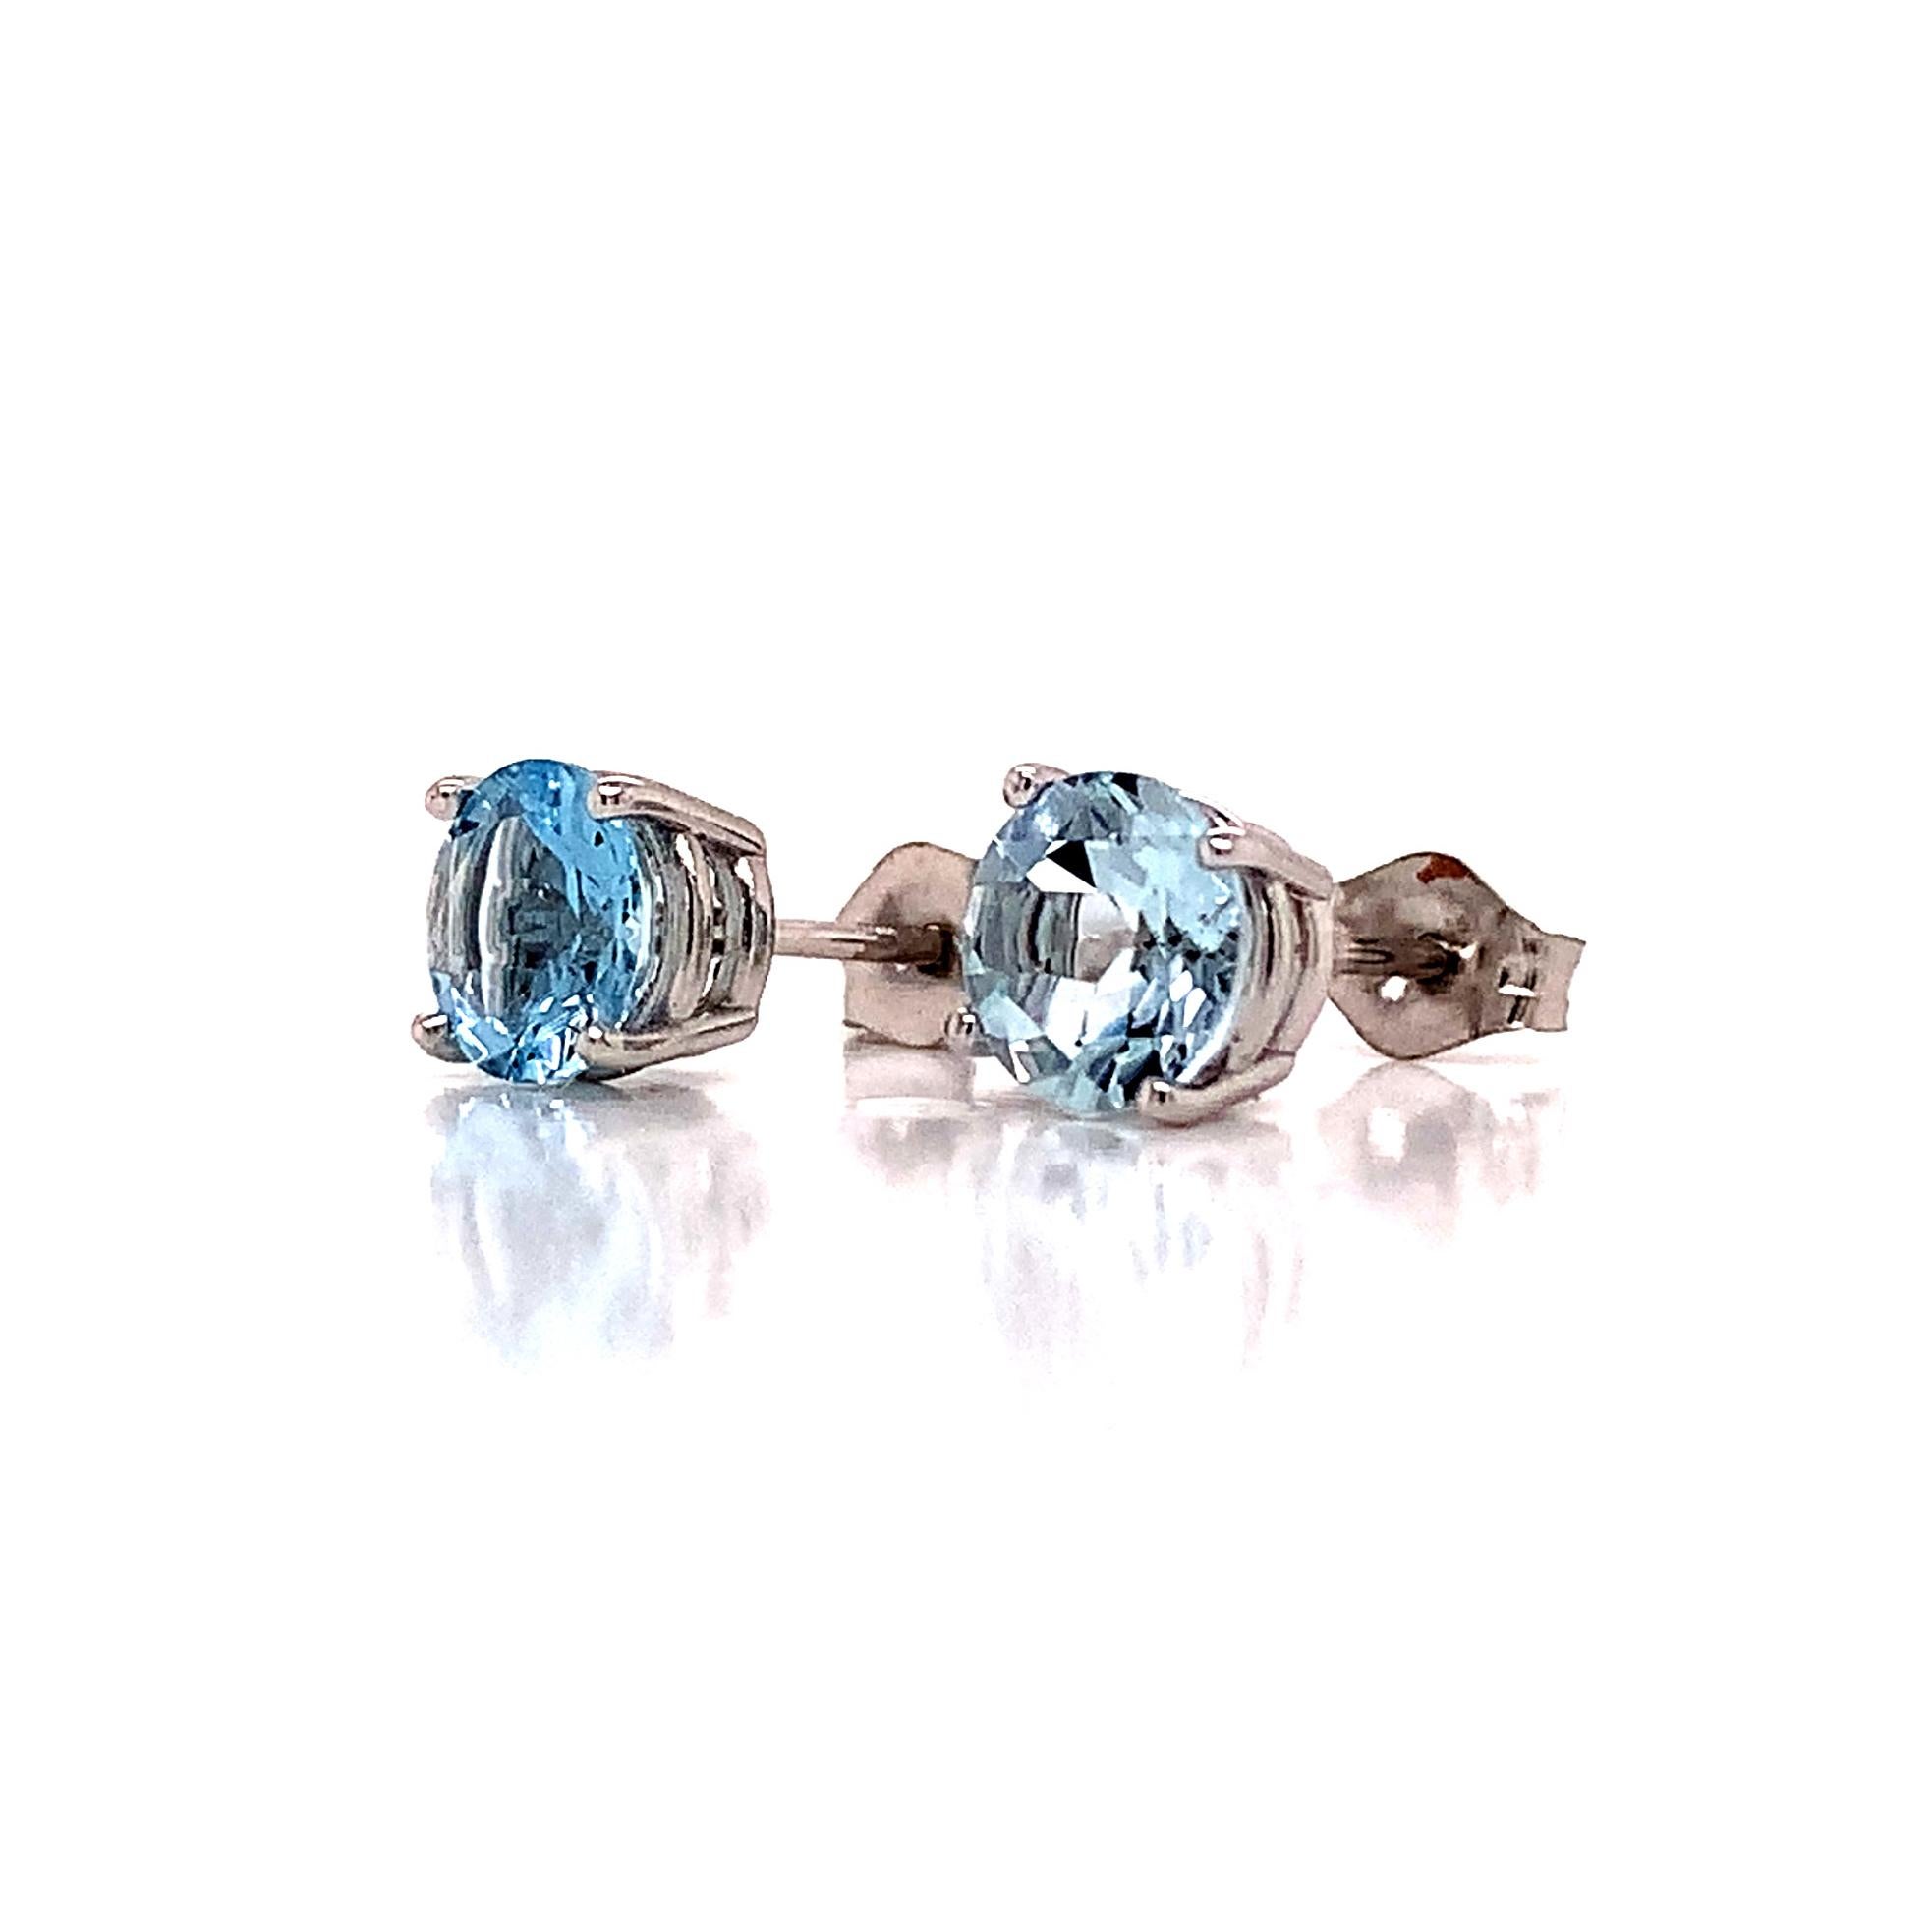 Natural Aquamarine Stud Earrings 14k White Gold 1.3 TCW Certified For Sale 5